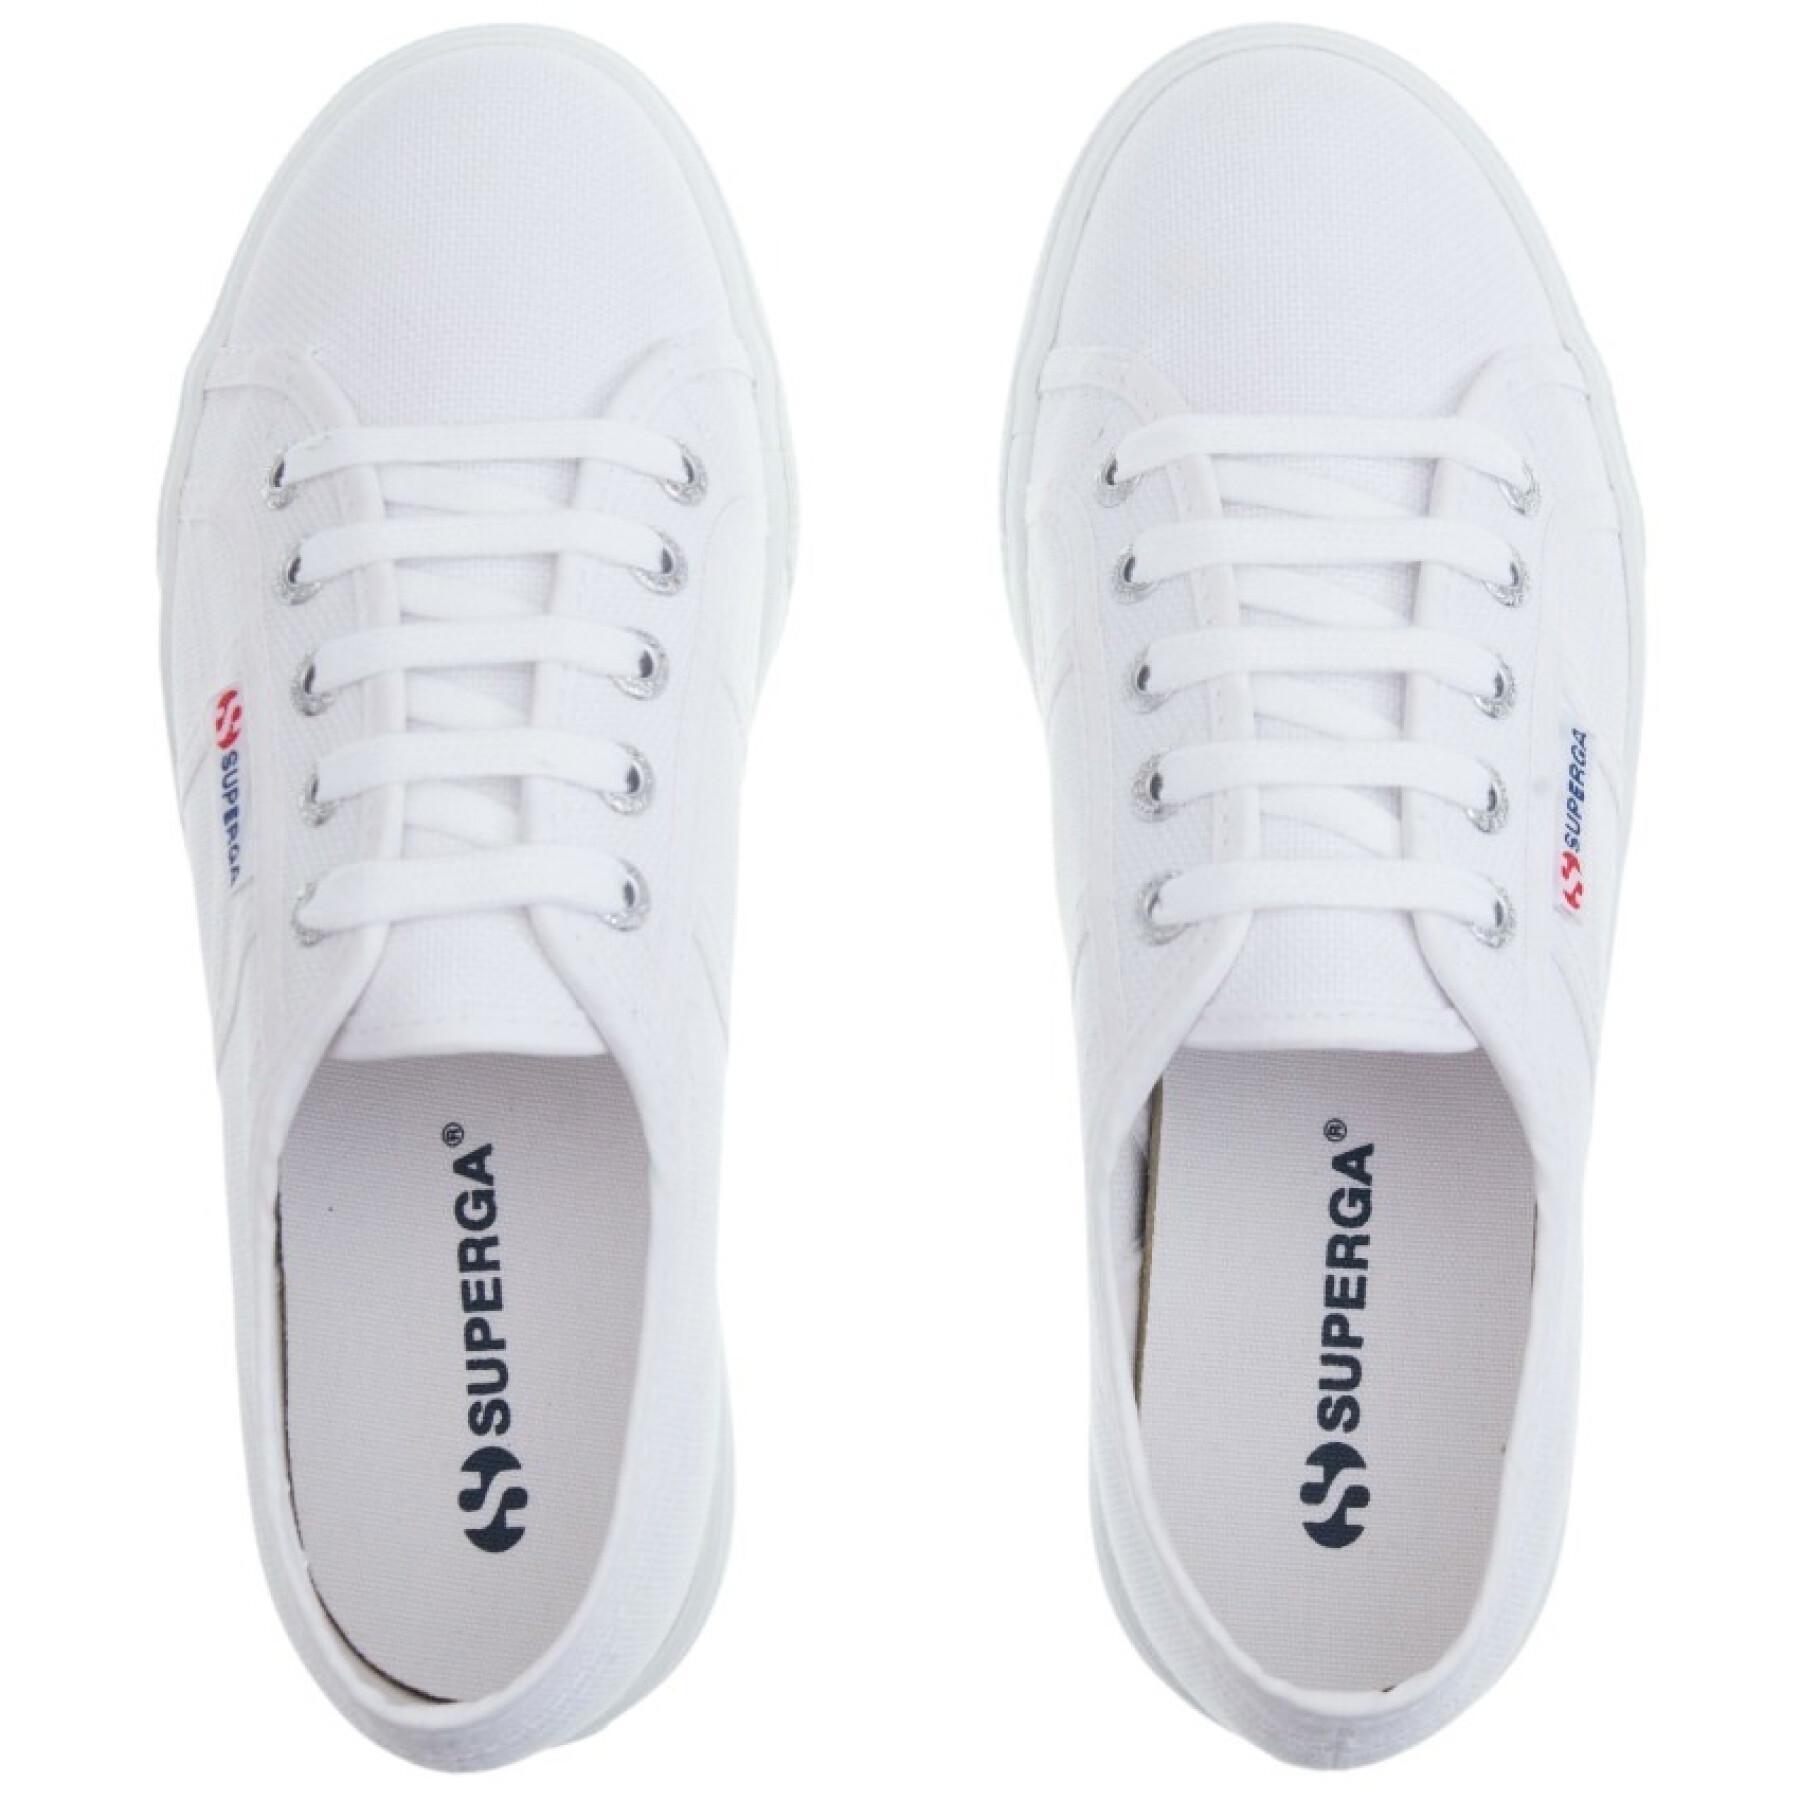 Women's sneakers Superga 2790 Cotw Linea Up
And Do